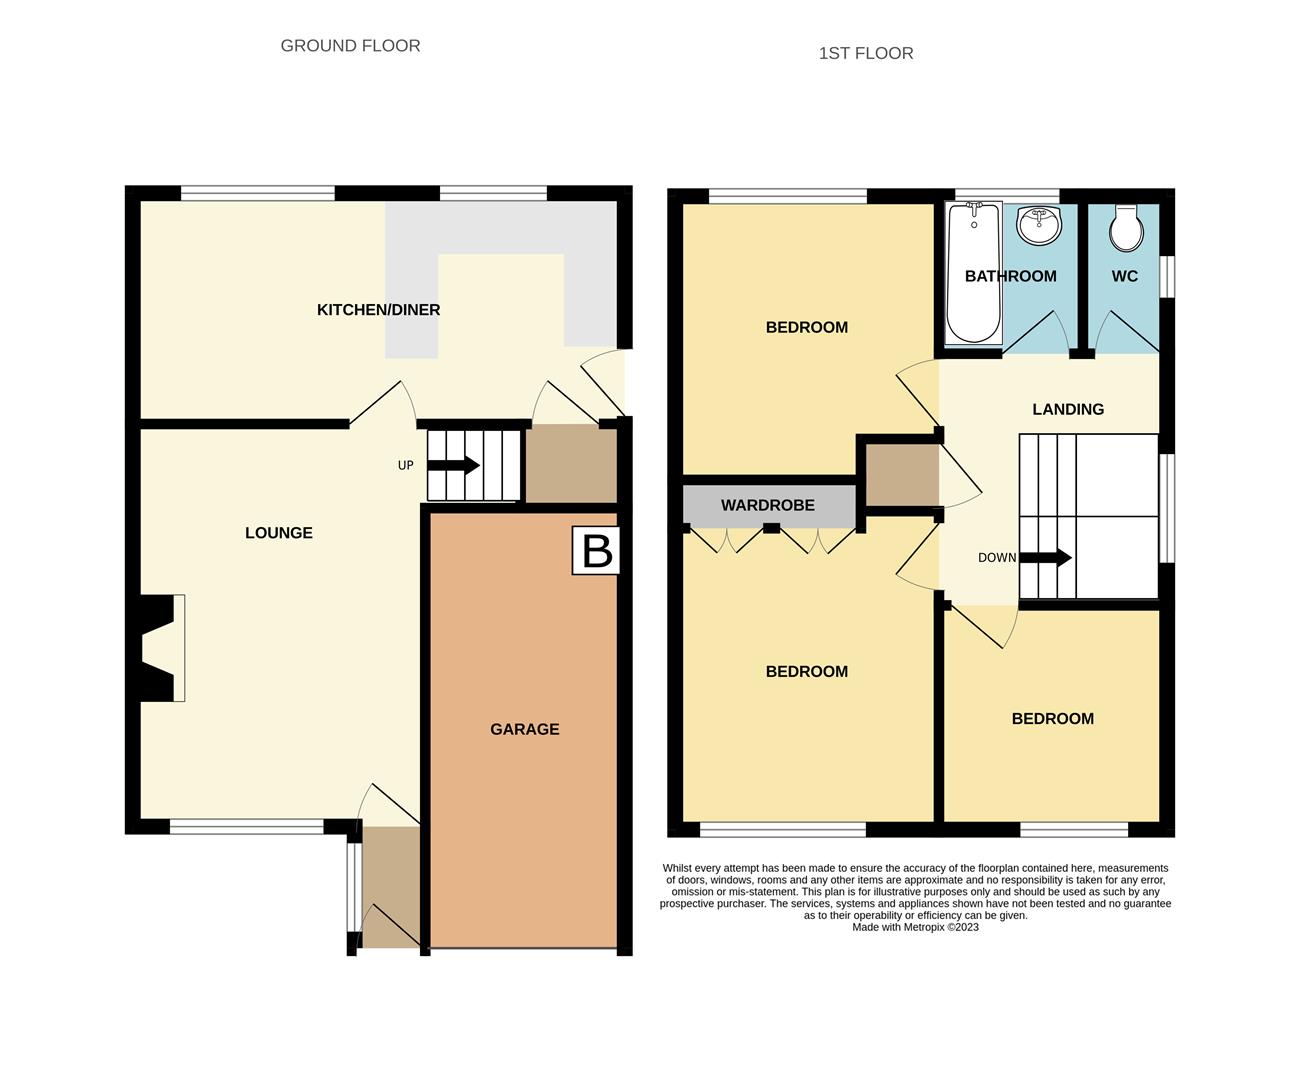 3 bed semi-detached house for sale - Property floorplan